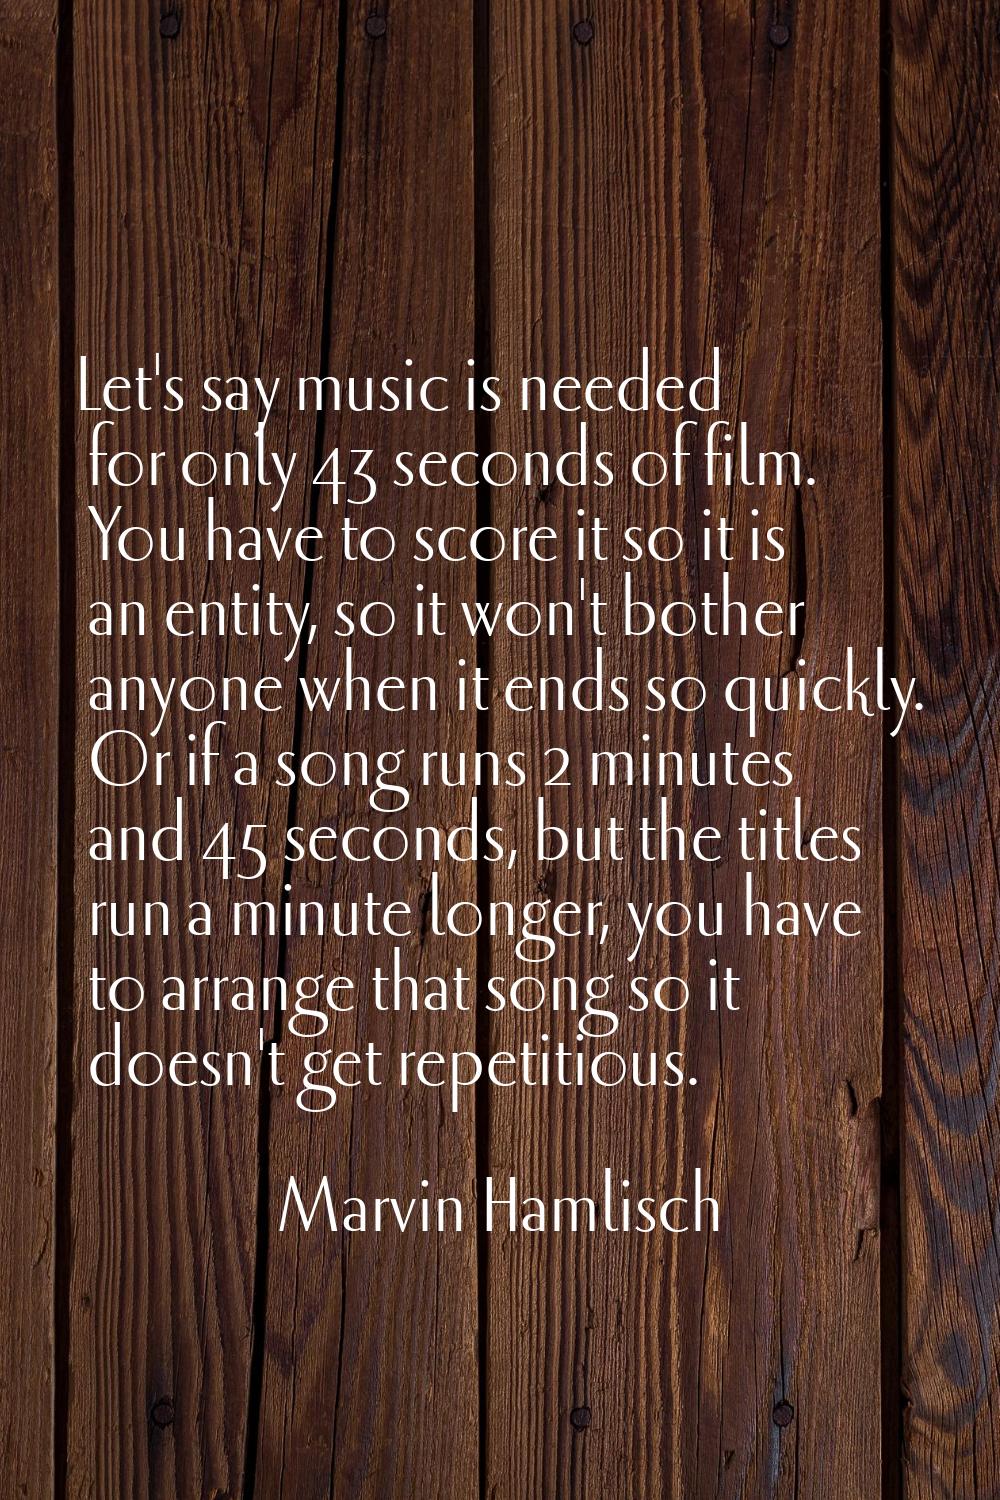 Let's say music is needed for only 43 seconds of film. You have to score it so it is an entity, so 